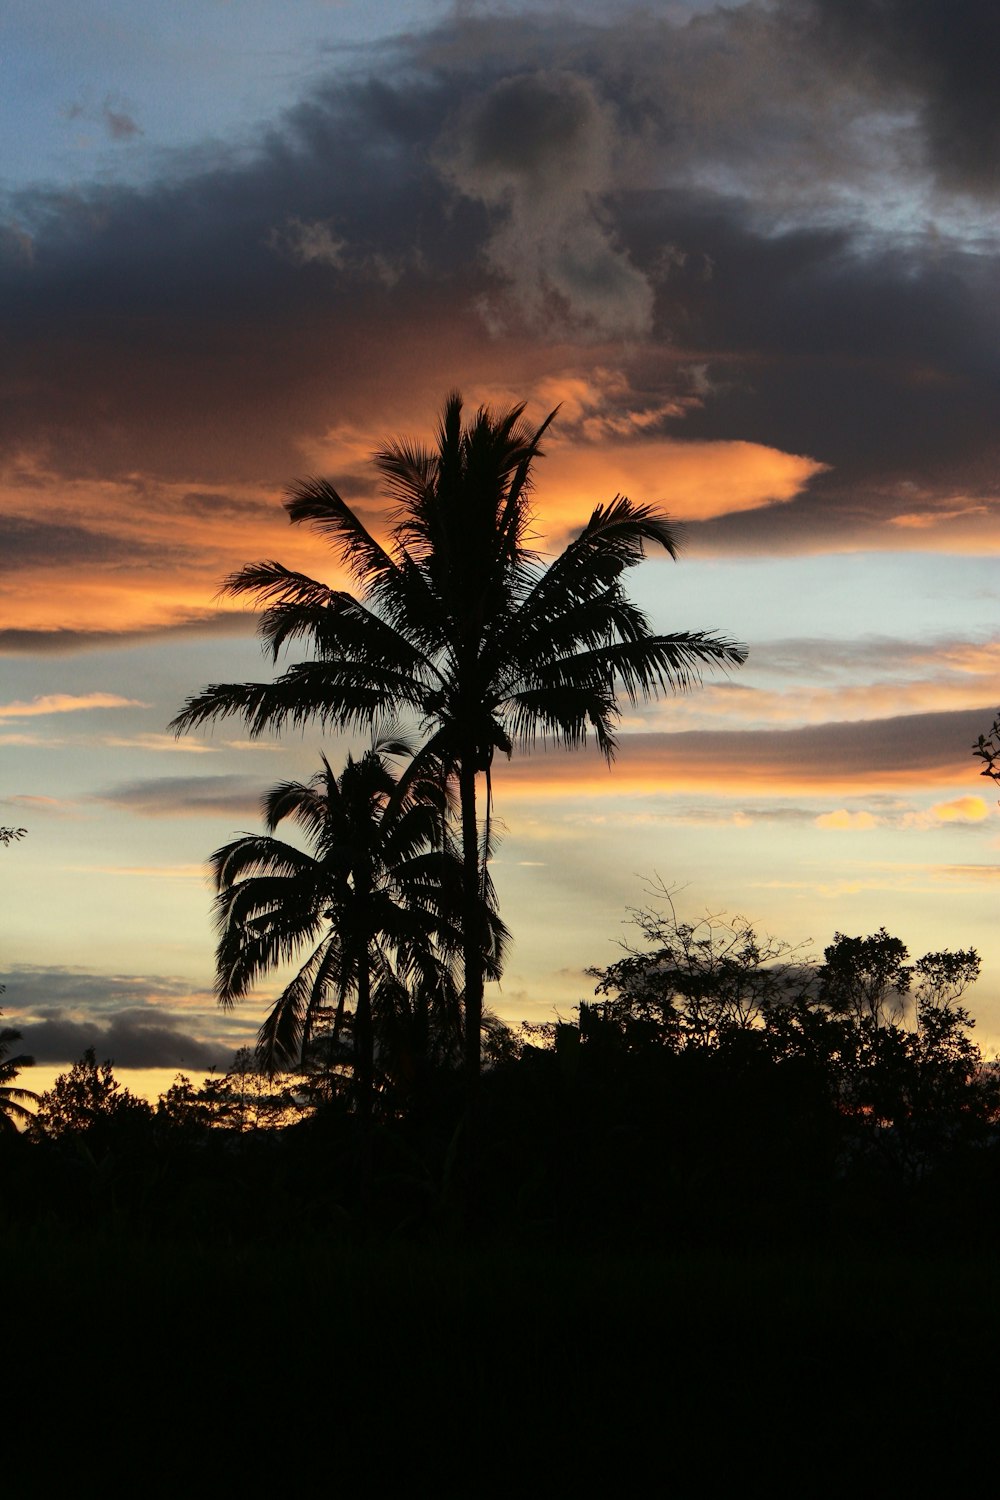 a palm tree is silhouetted against a colorful sunset